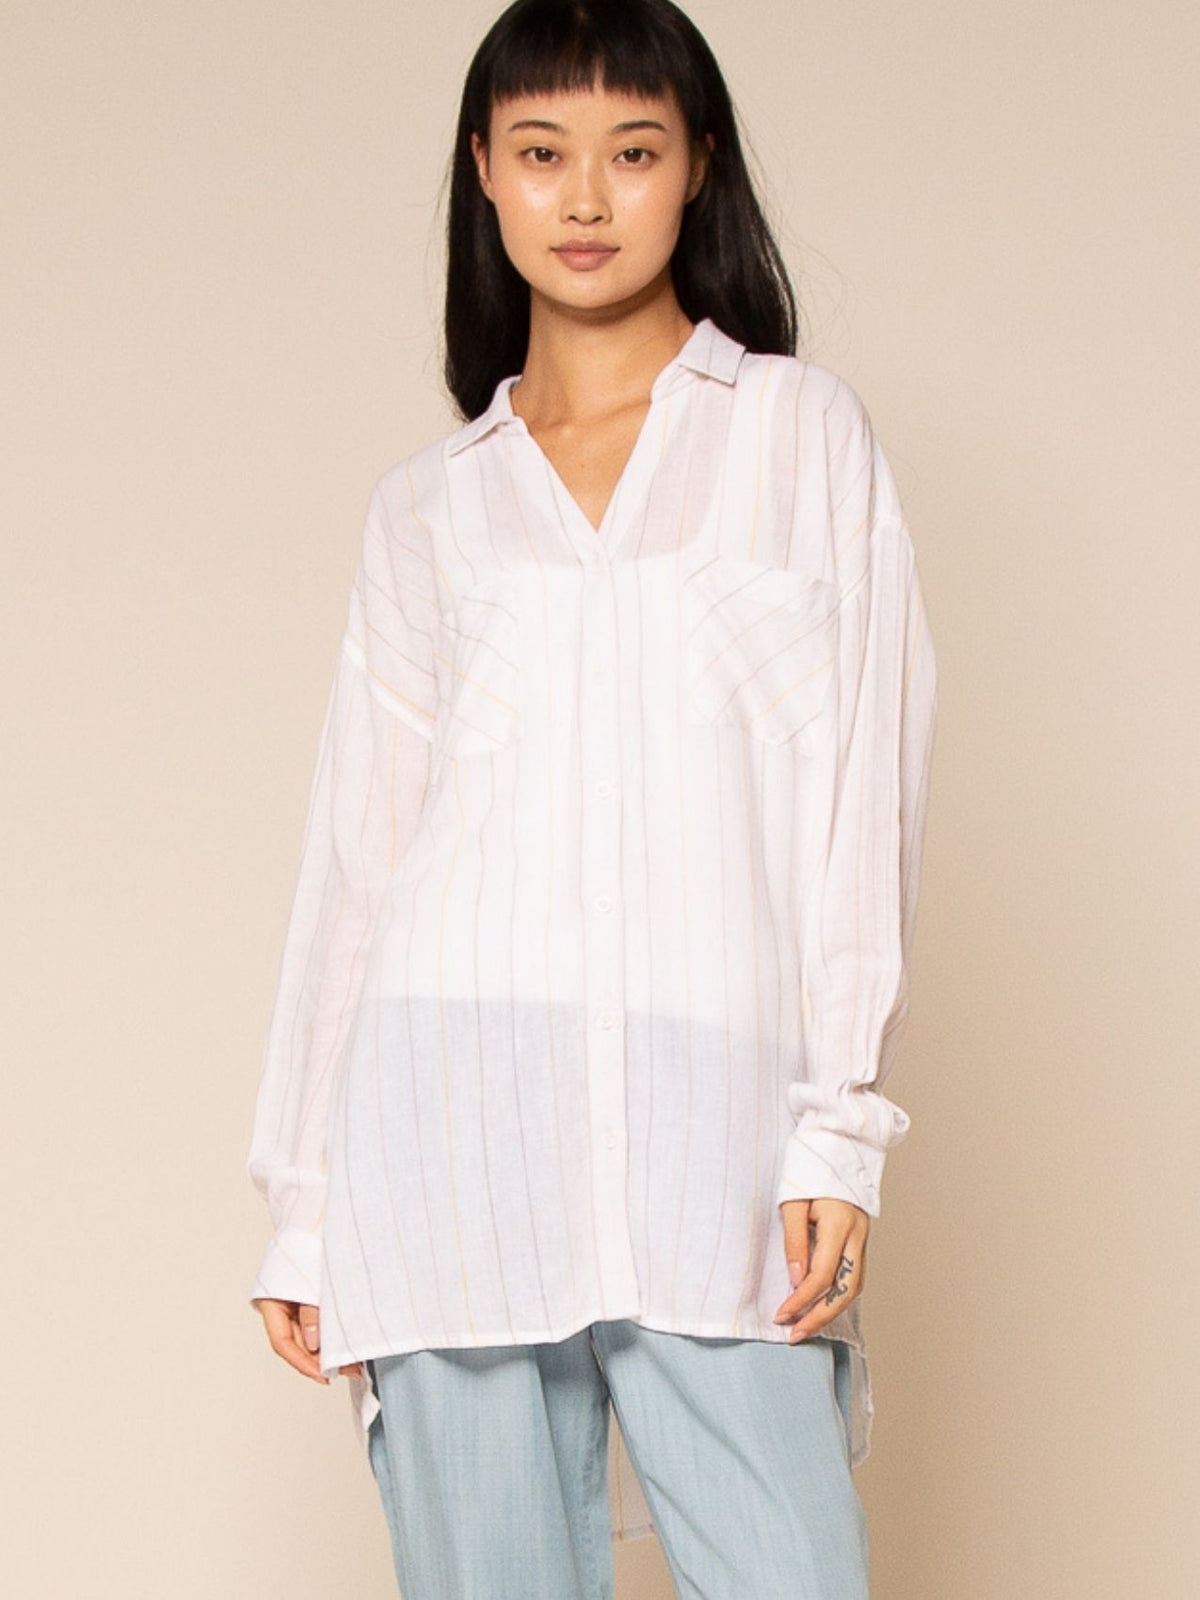 Barrymore Tunic | Women's Loungewear Outfits | Thread & Supply